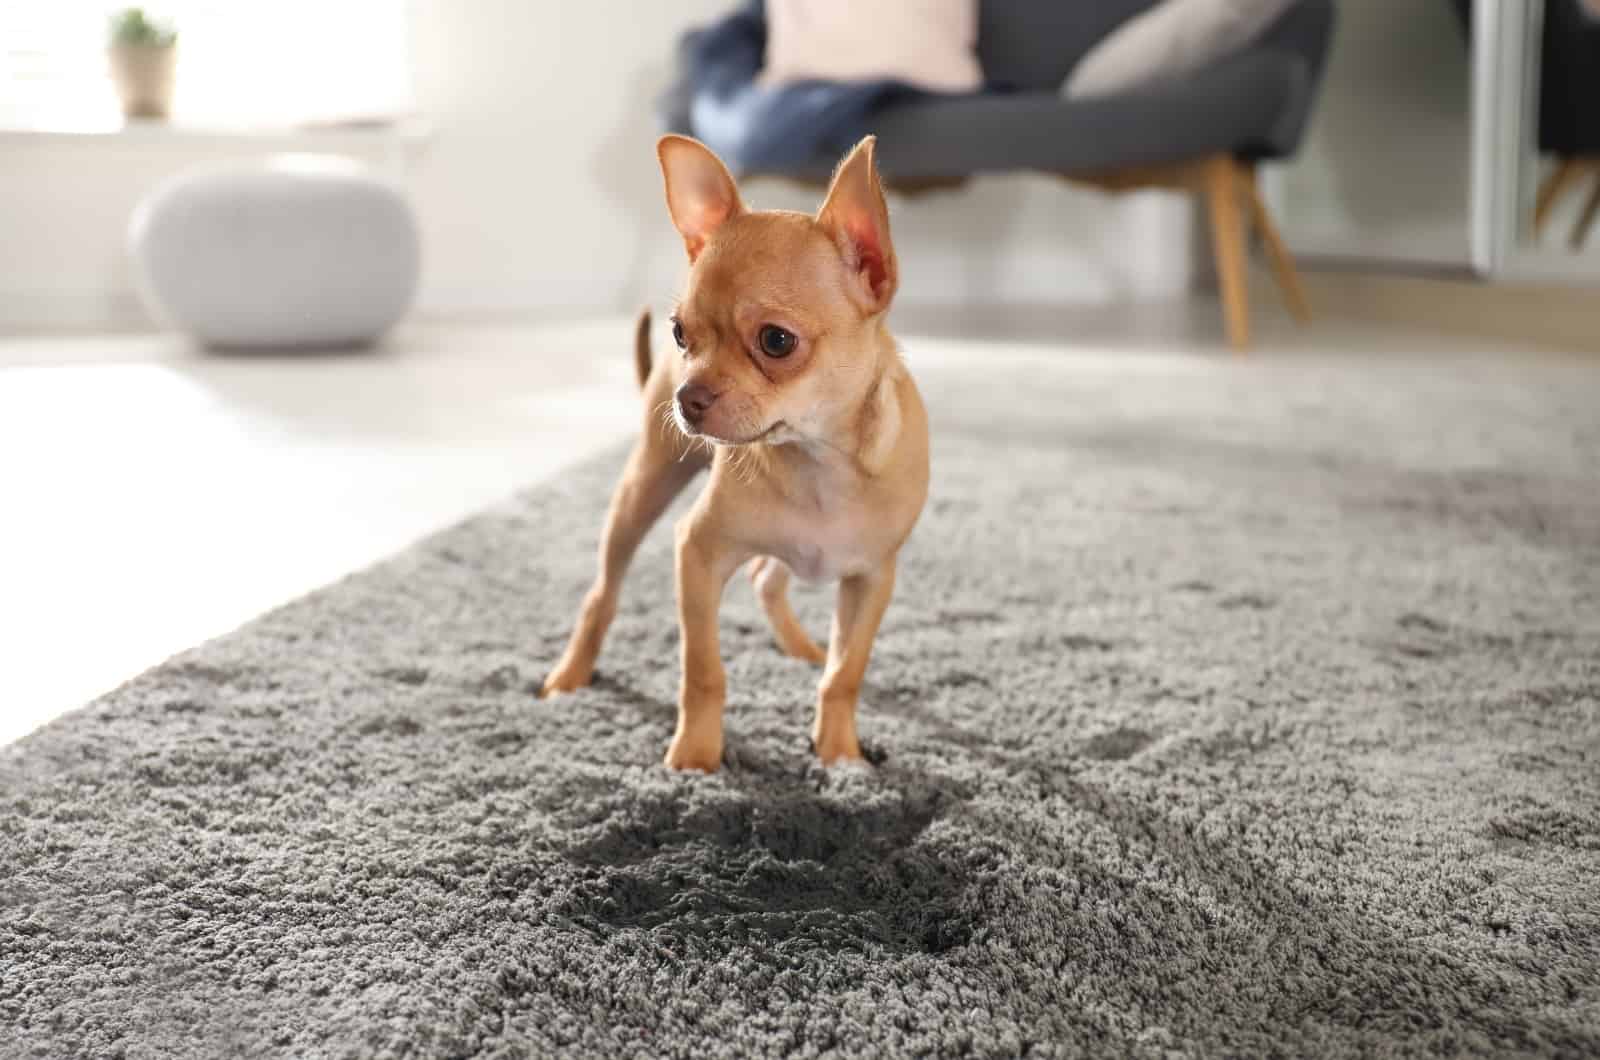 Chihuahua standing on carpet